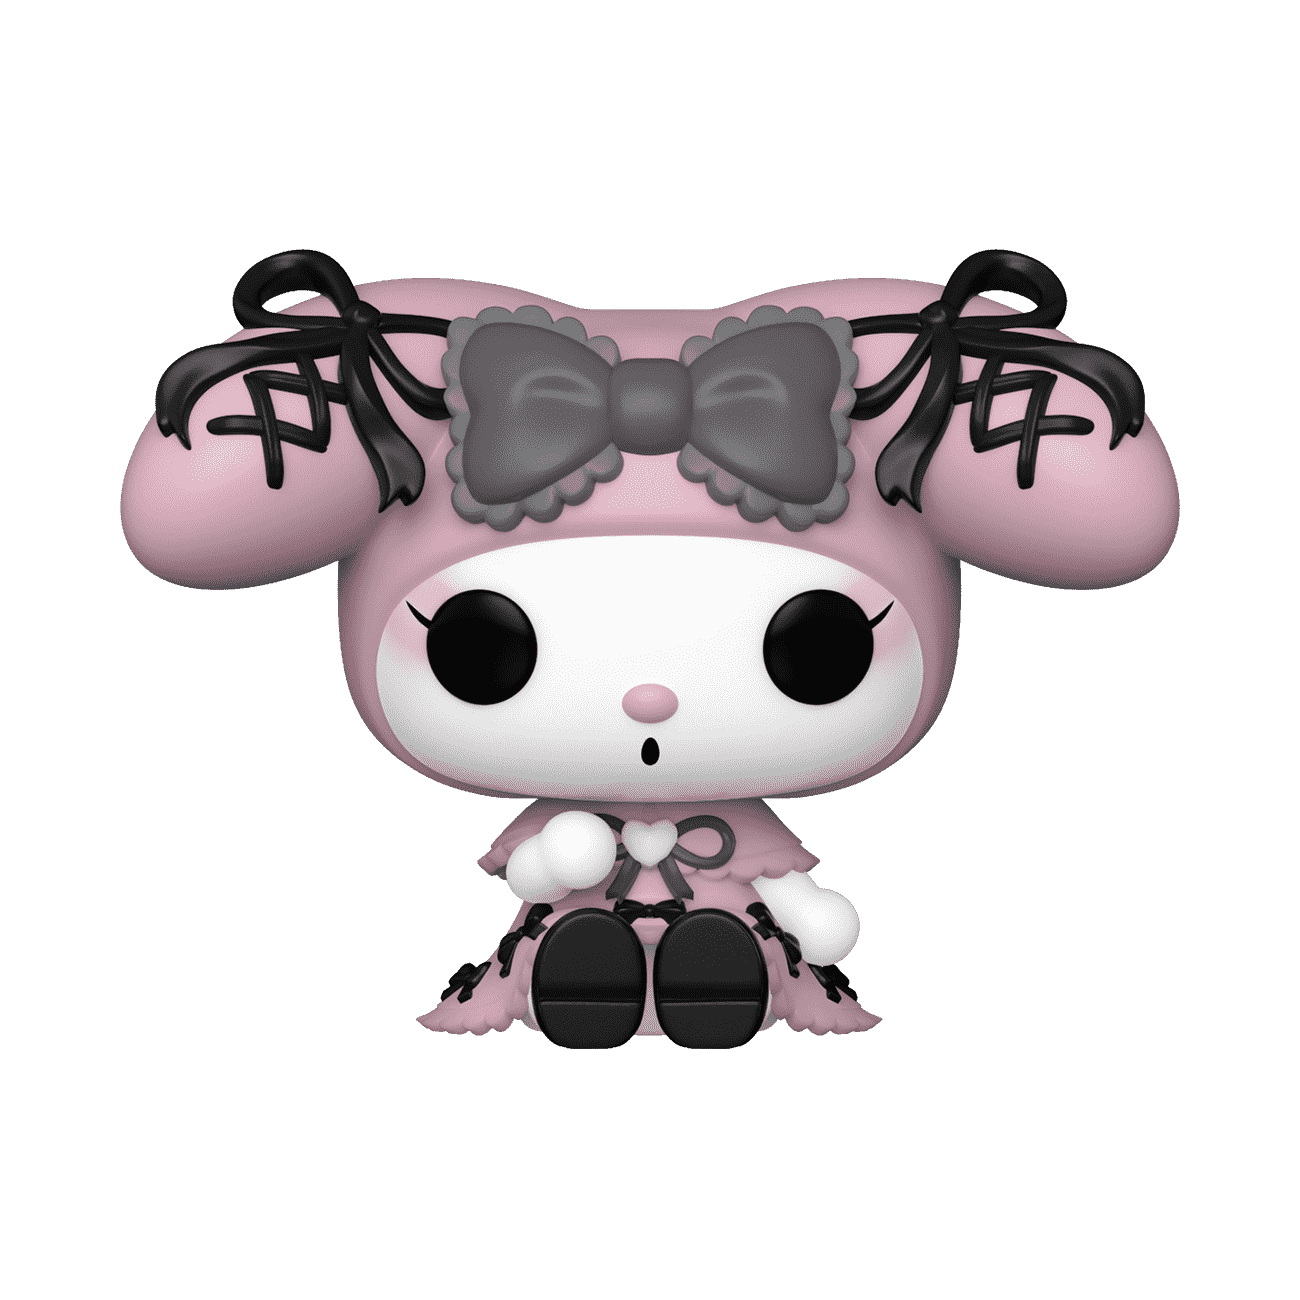 Buy Pop! My Melody in Lolita Outfit at Funko.